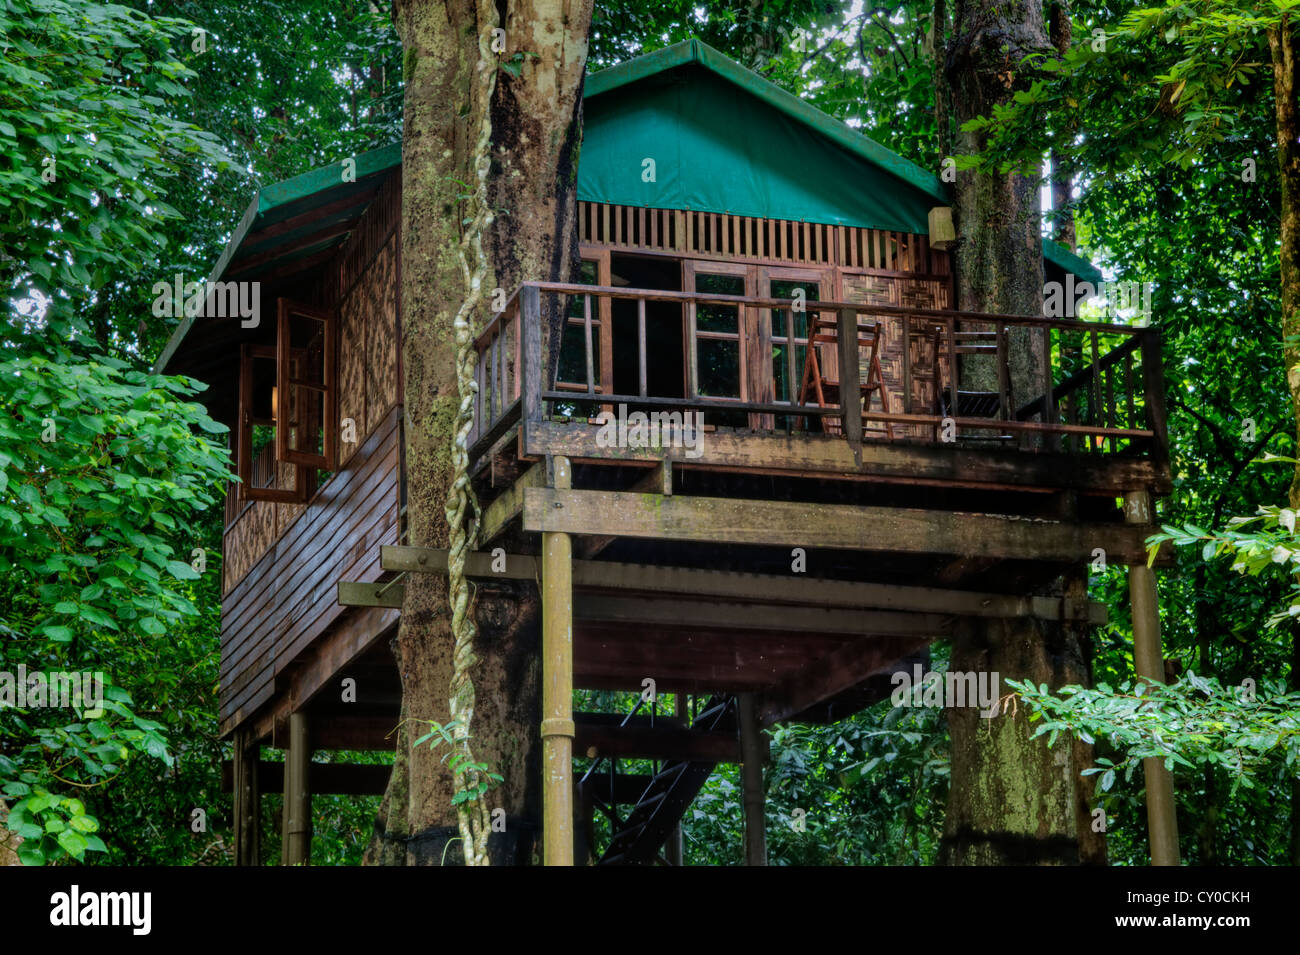 TREE HOUSES are the specialty of OUR JUNGLE HOUSE KHAO SOK NATIONAL PARK - SURATHANI PROVENCE, THAILAND Stock Photo